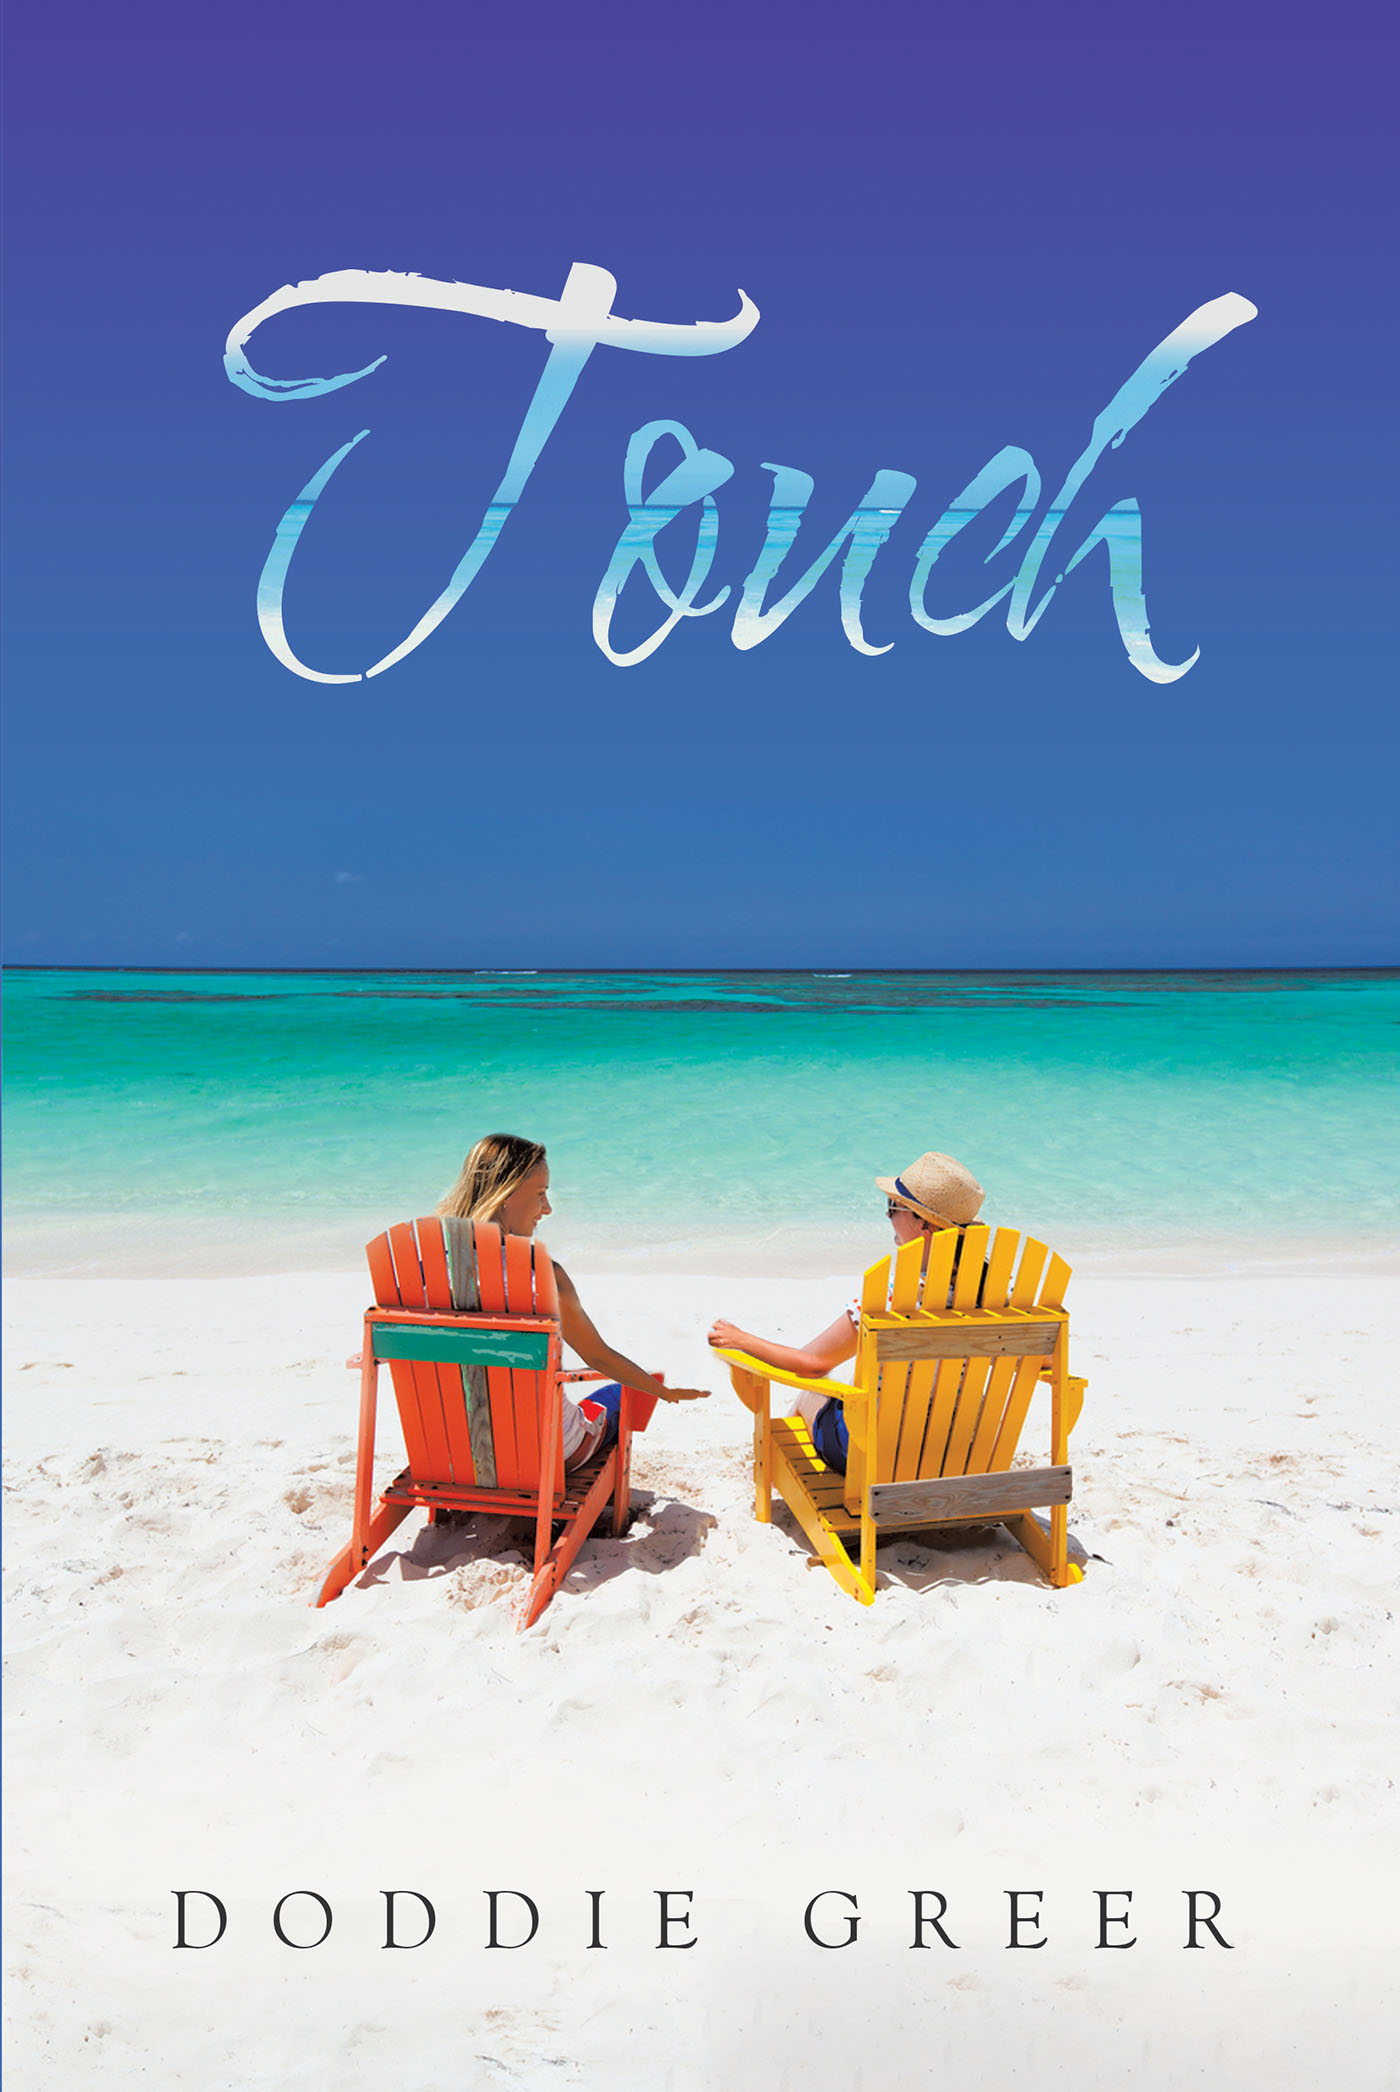 Touch Cover Image